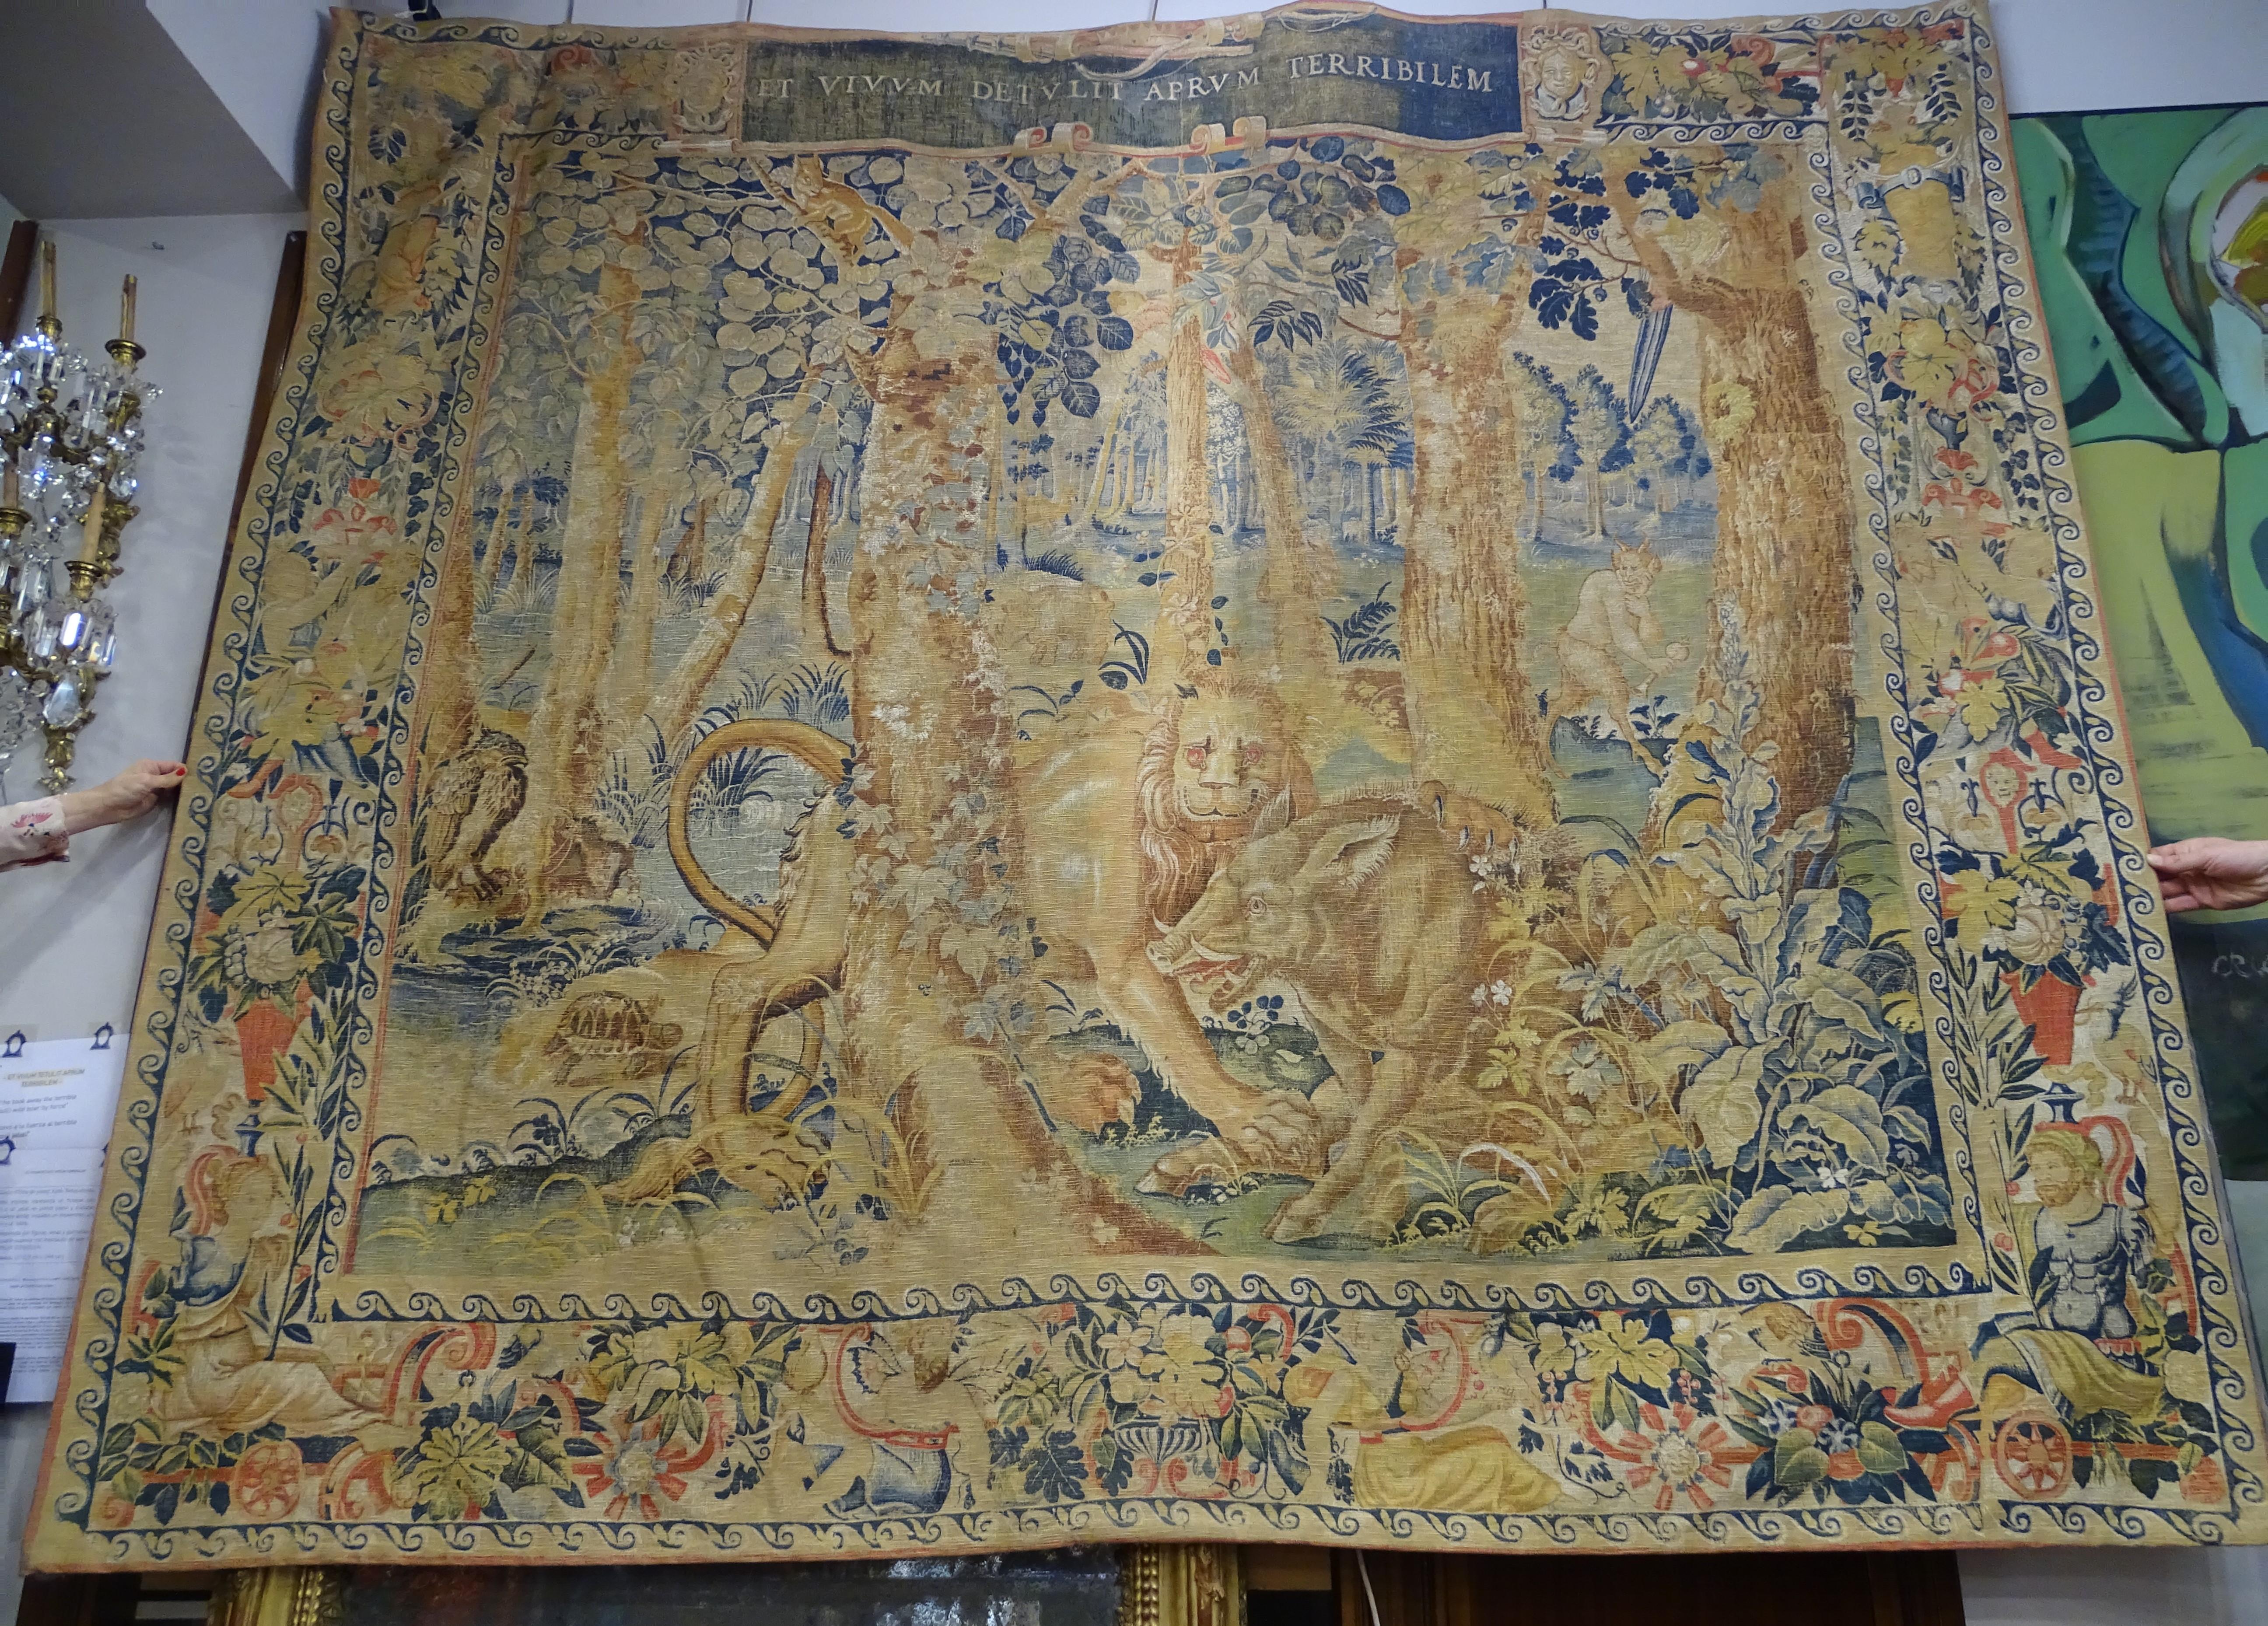 Outstanding French tapestry, printed scene depicts a forest with a lion attacking a boar in the foreground and exotic creatures in the undergrowth in the background, including a rhinoceros, tortoise, camel, and satyr.
In green, red, blue and brown